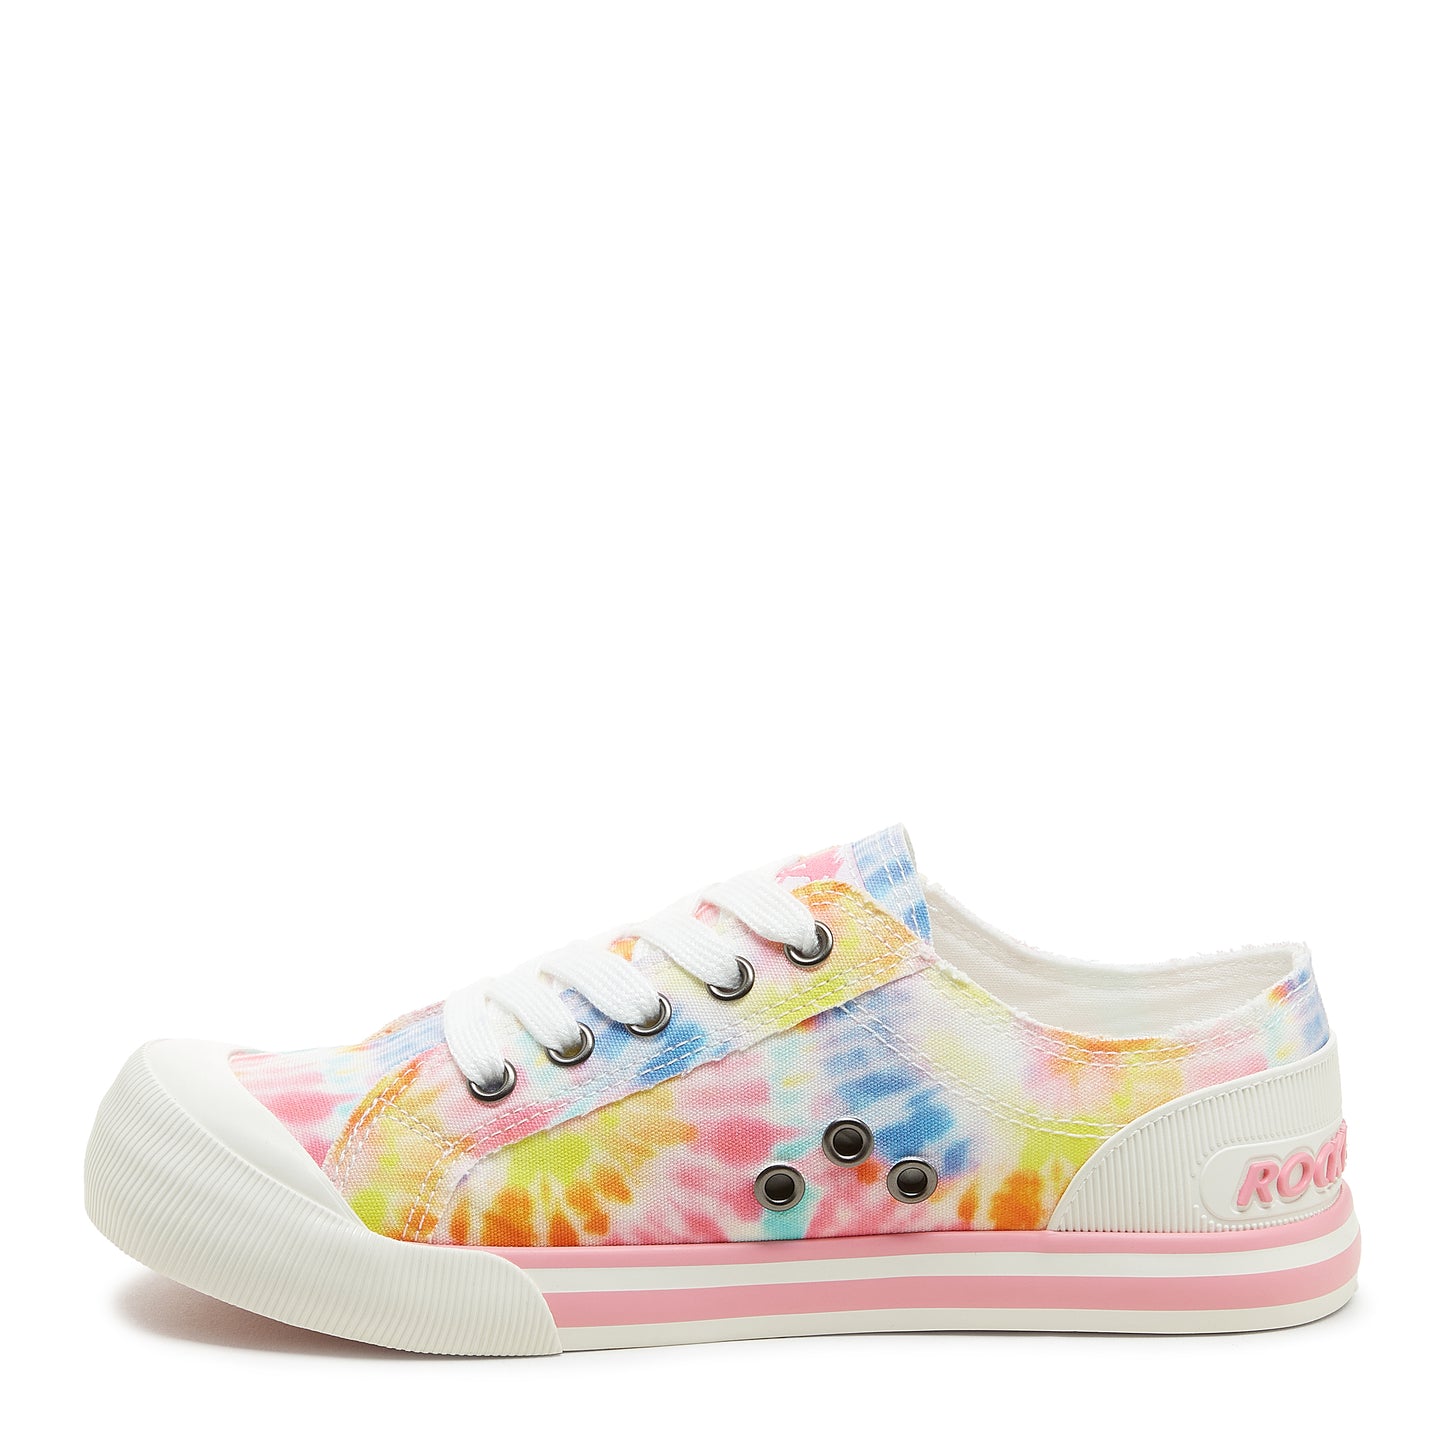 Jazzin Recycled Cotton Bright Tie Dye Trainers